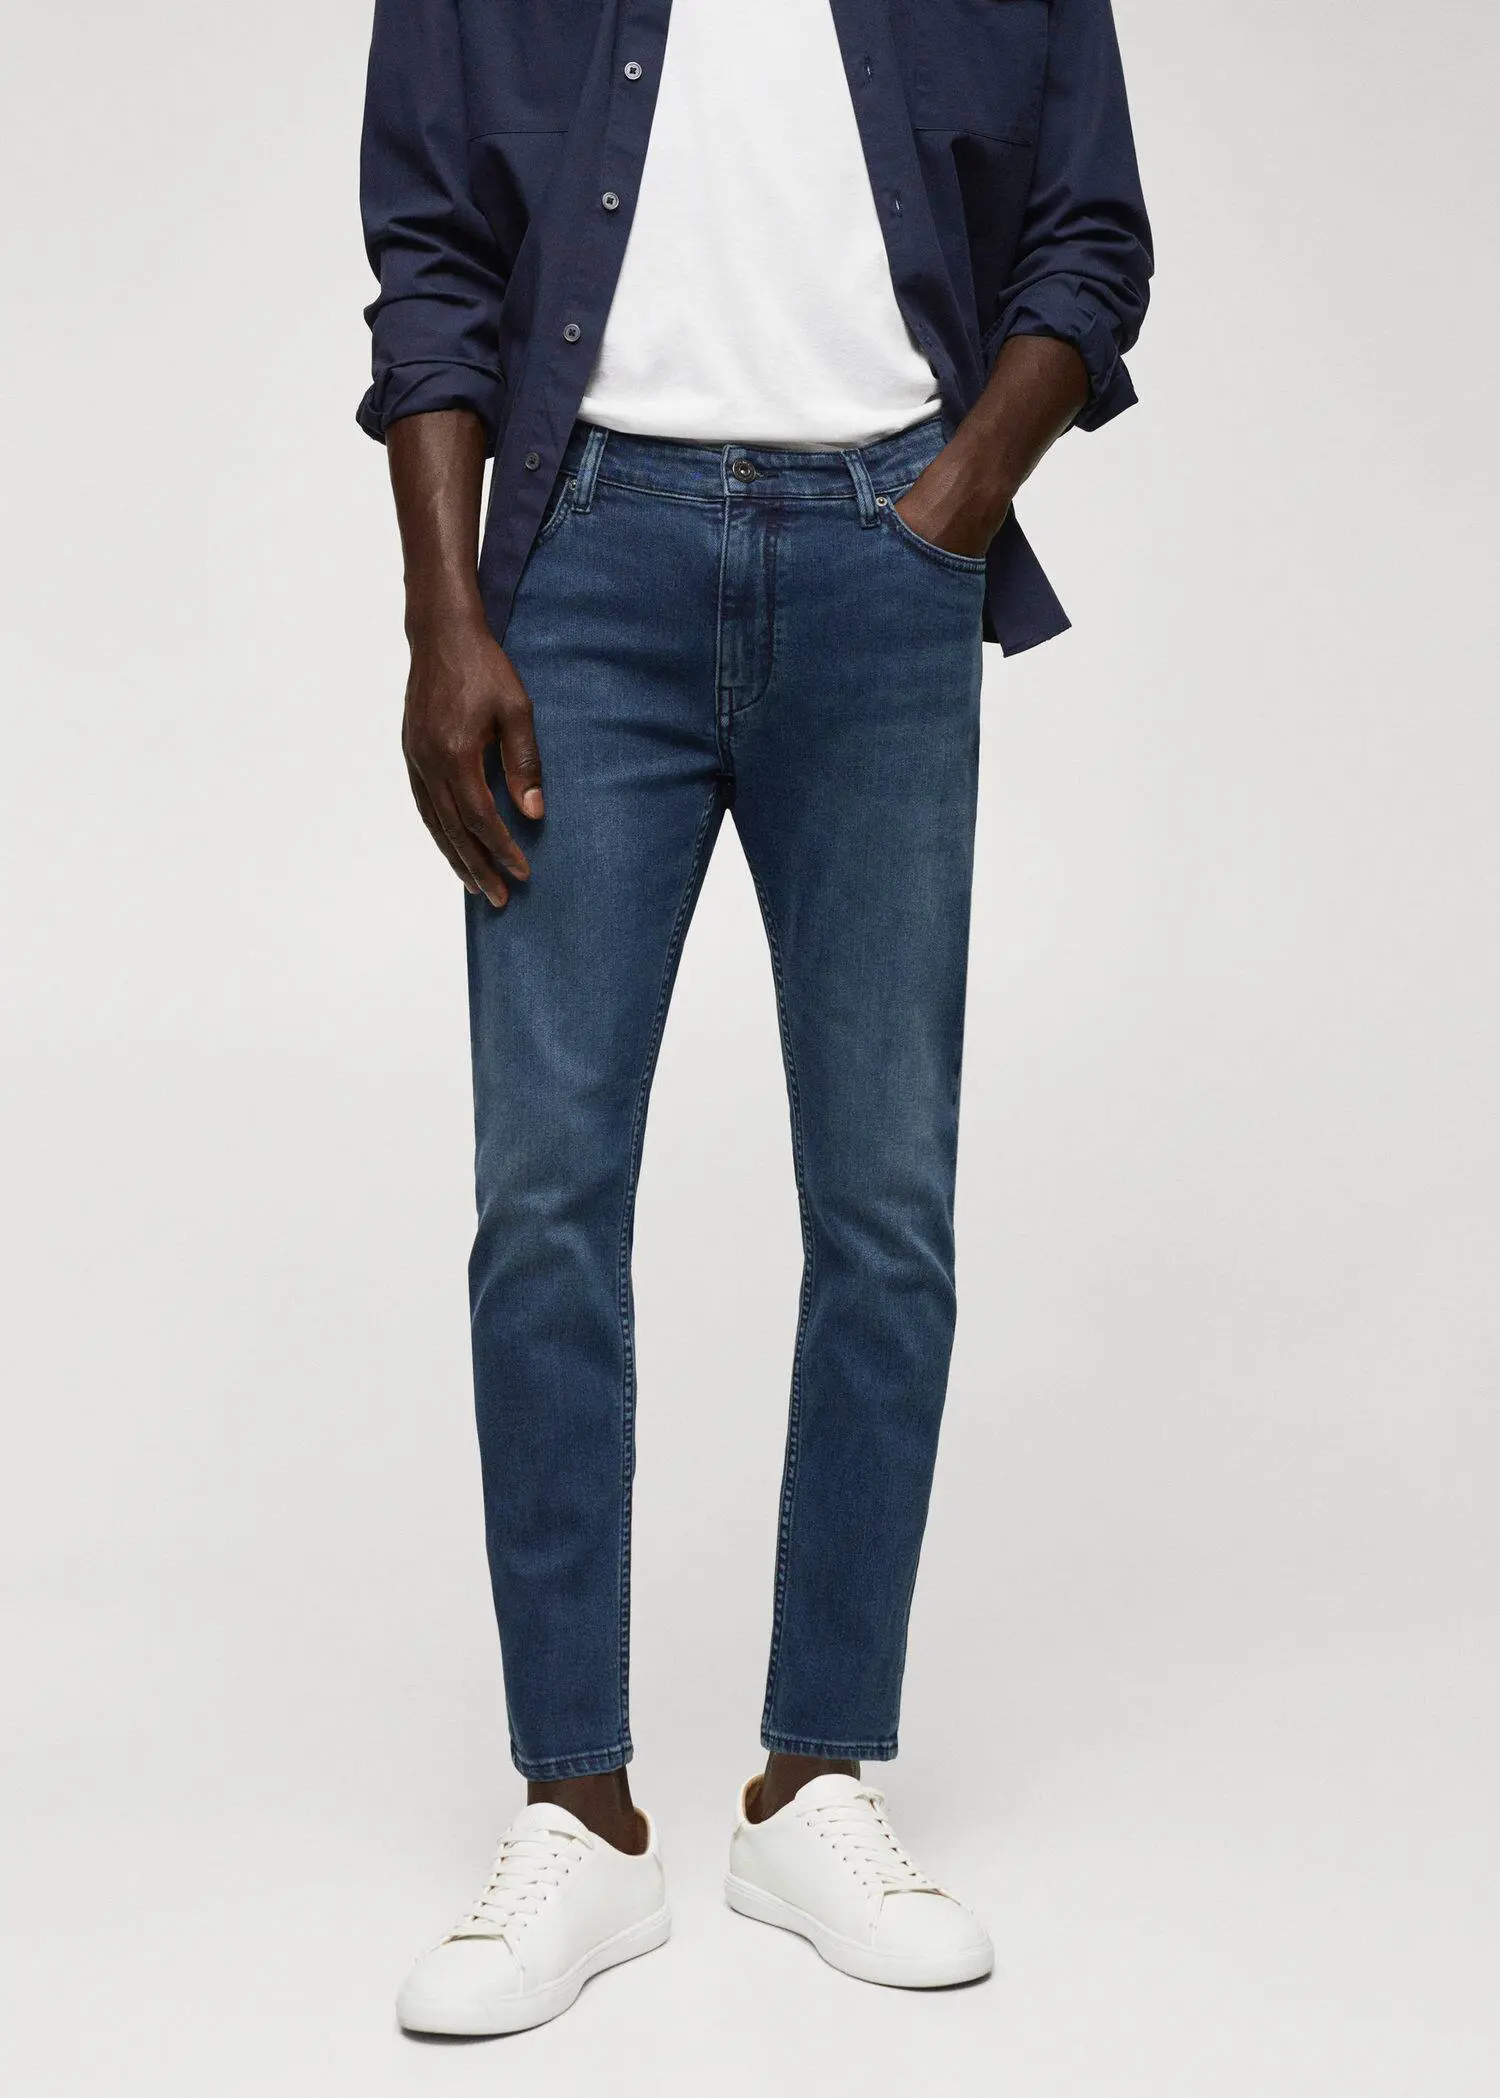 Mango Tom tapered cropped jean. 2